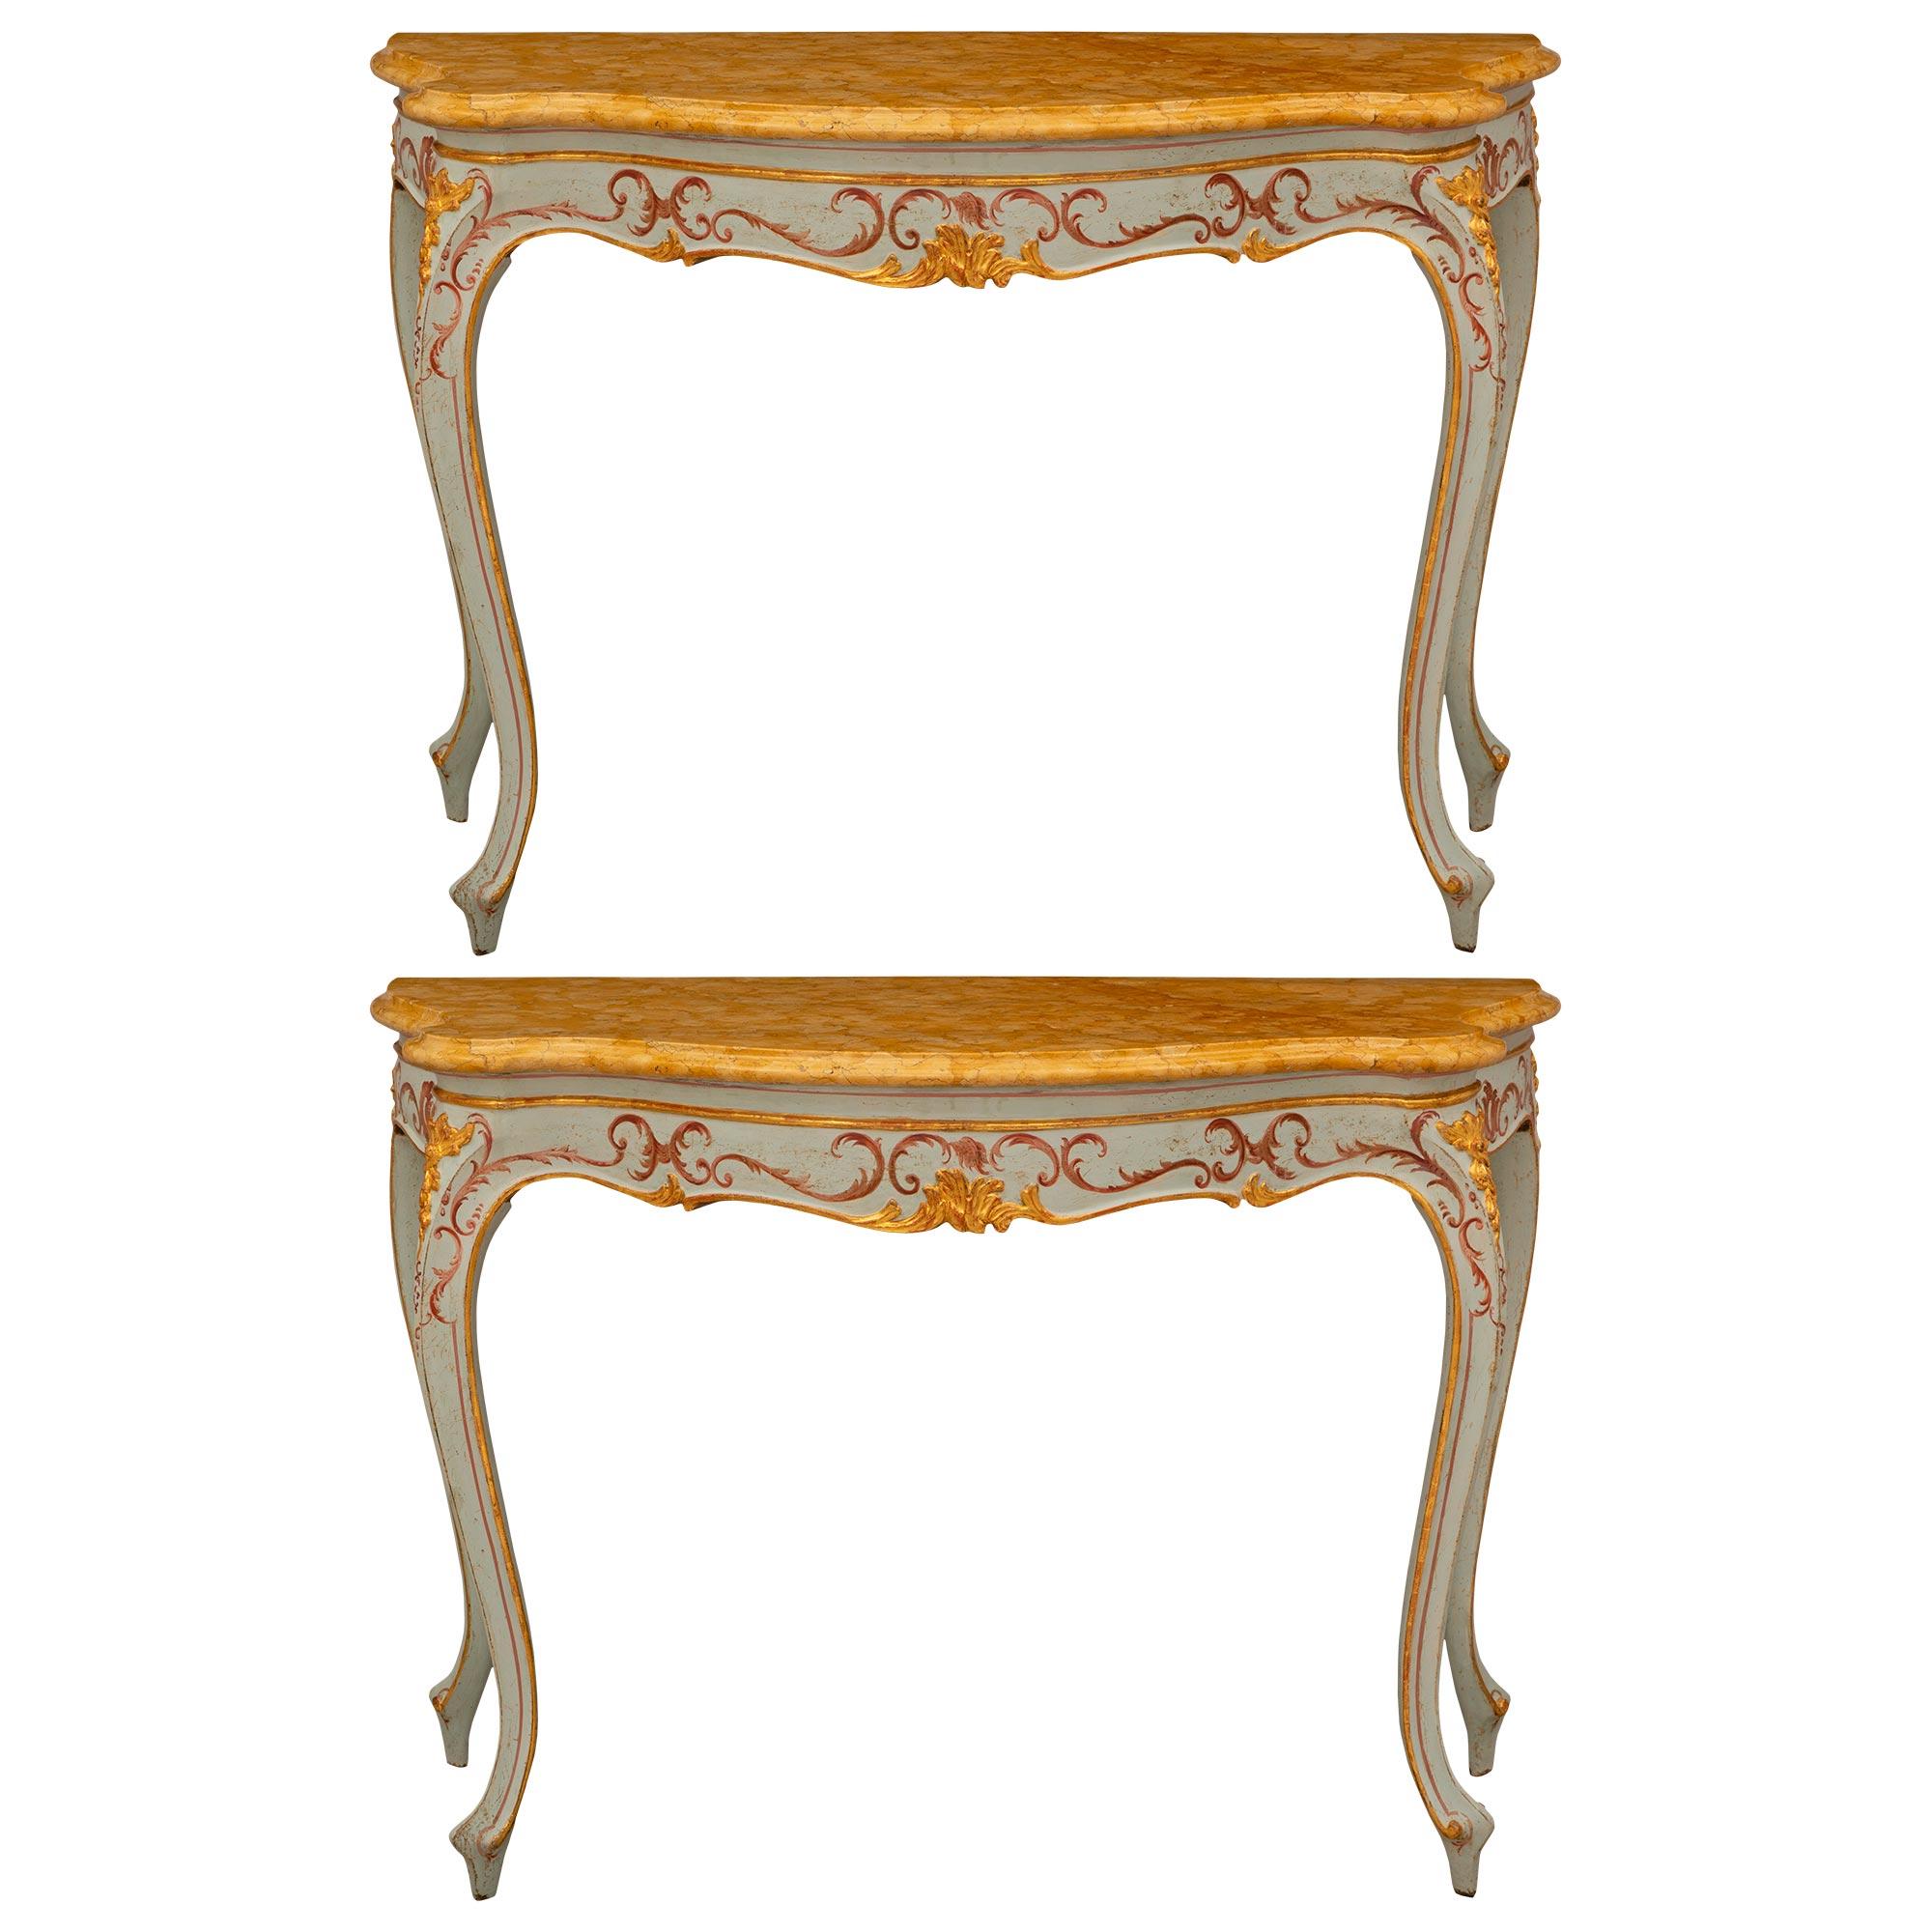  Pair Of Italian 18th c. Venetian St. Giltwood, Patinated Wood & Marble Consoles For Sale